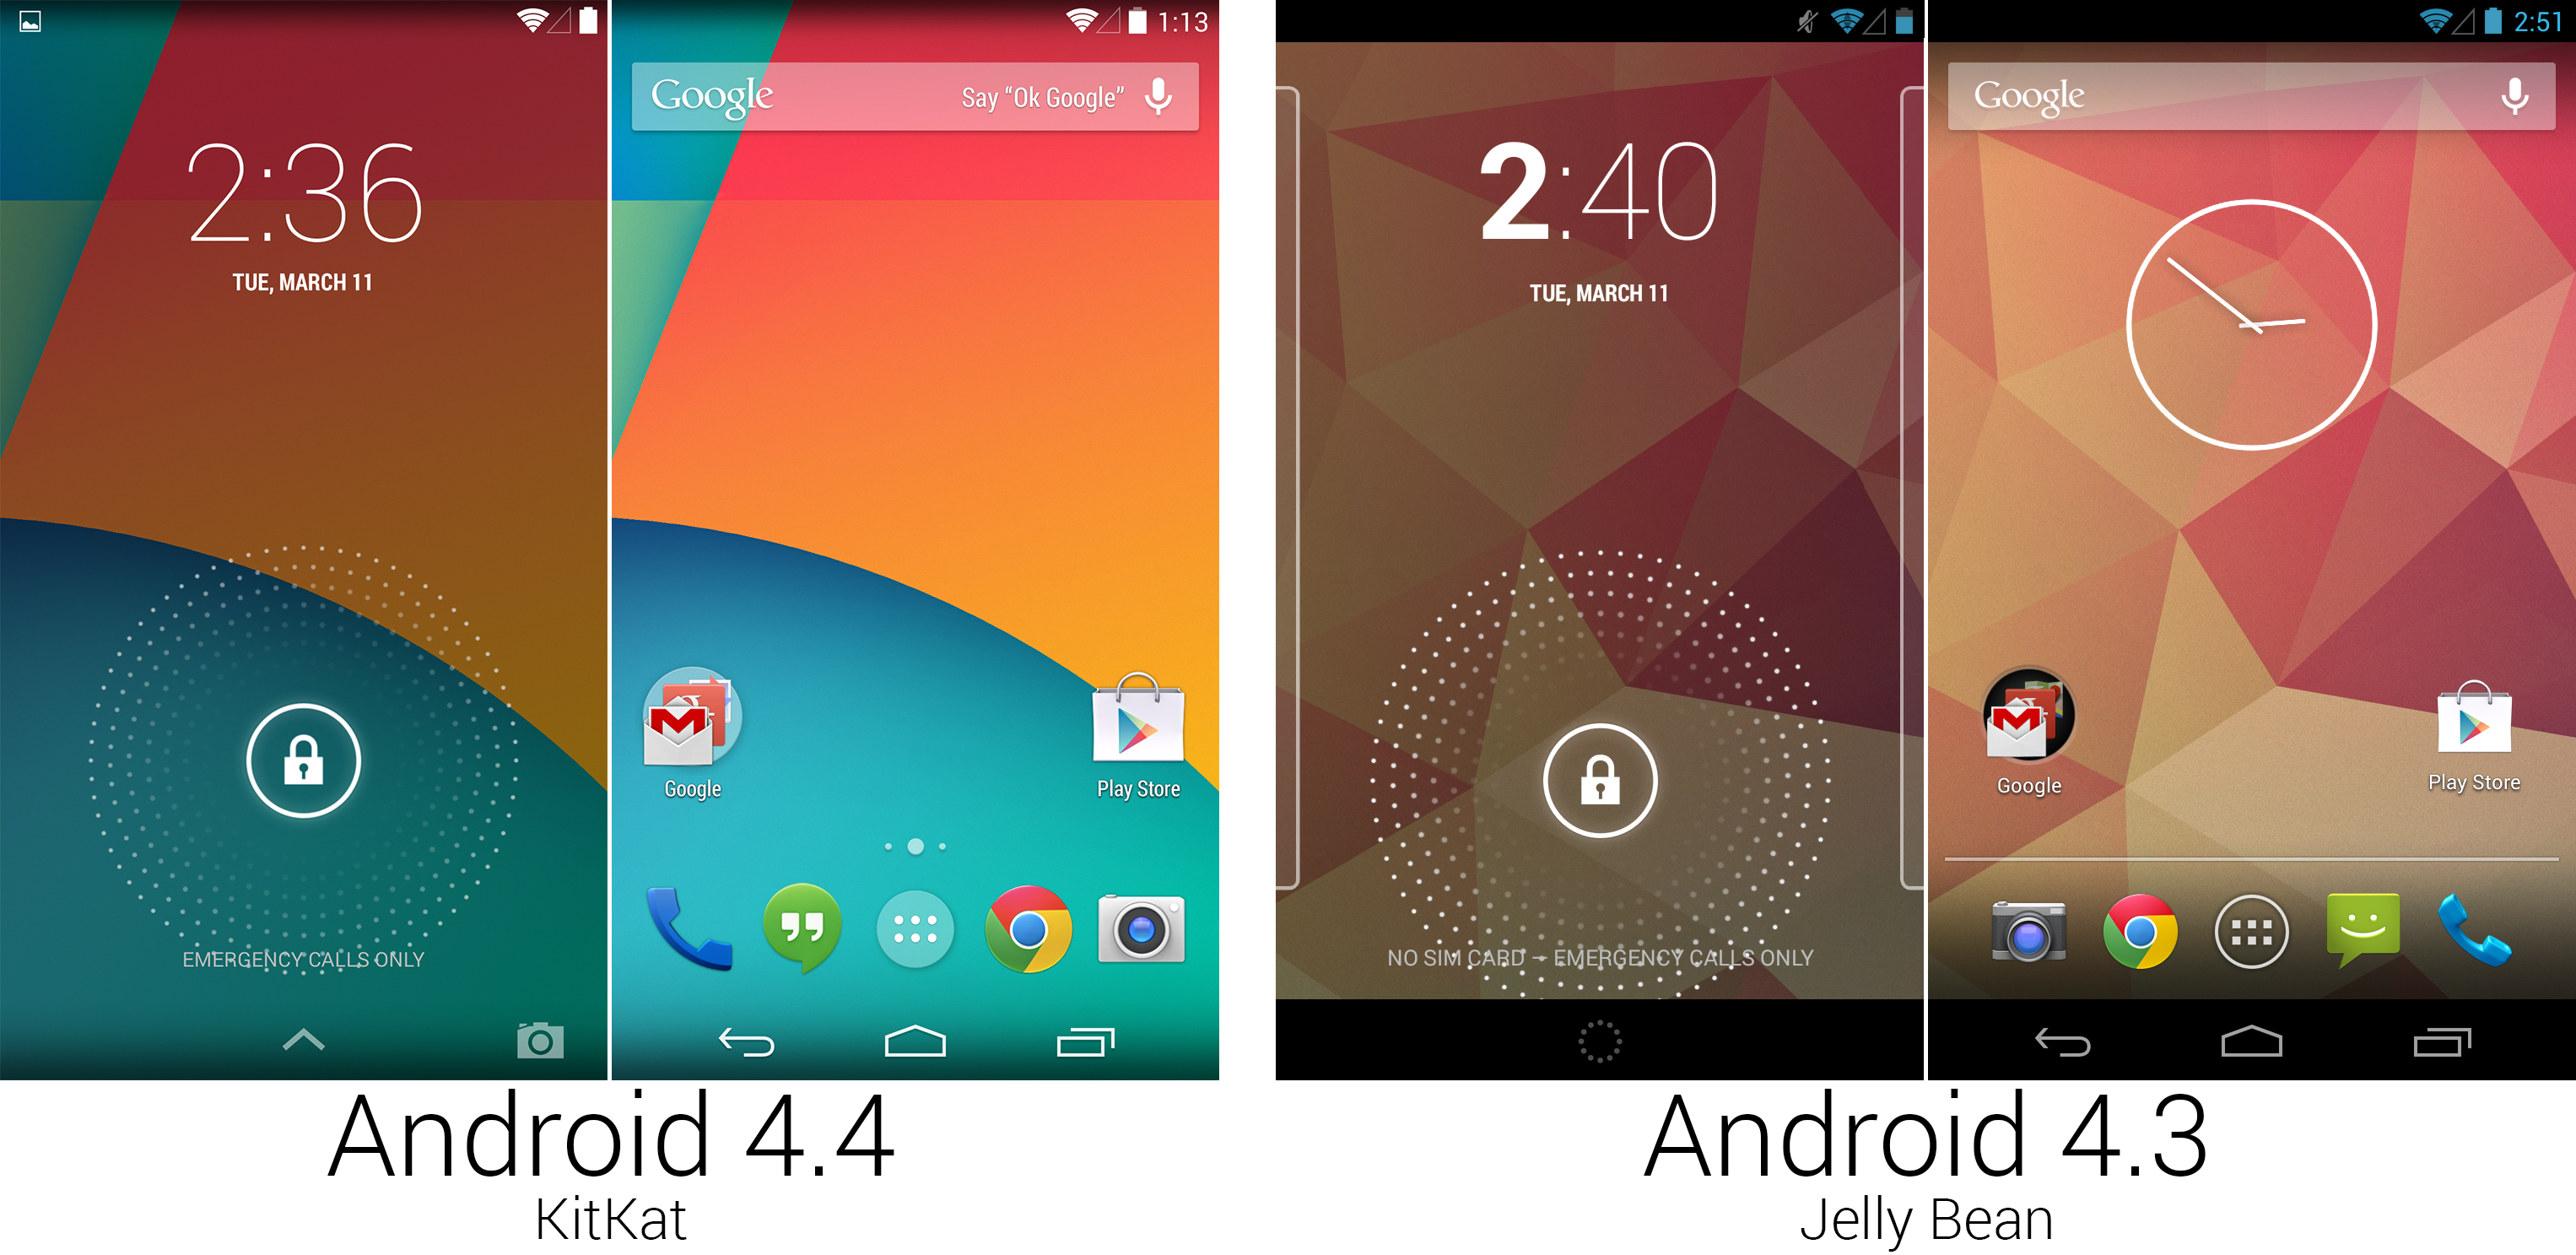 Jelly android. Android 4.4 Kitkat поддержка. Android Jelly Bean. Android Kitkat Интерфейс. Android 4.1 Jelly Bean.